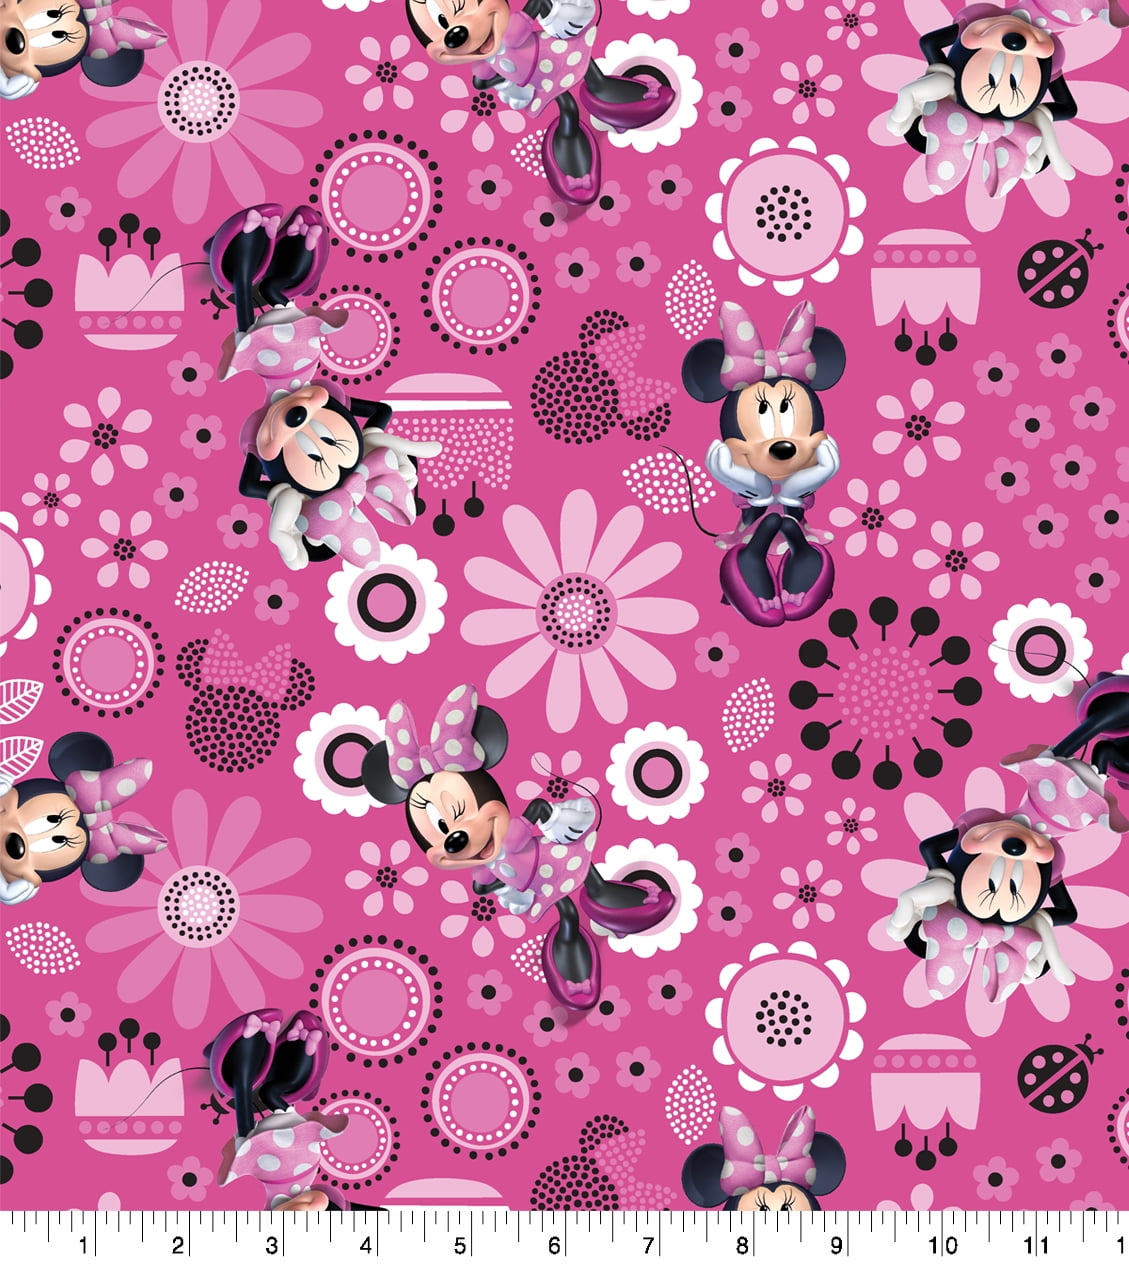 100% Cotton Disney Minnie Mouse on Pink Fabric Children's Kids Clothes 